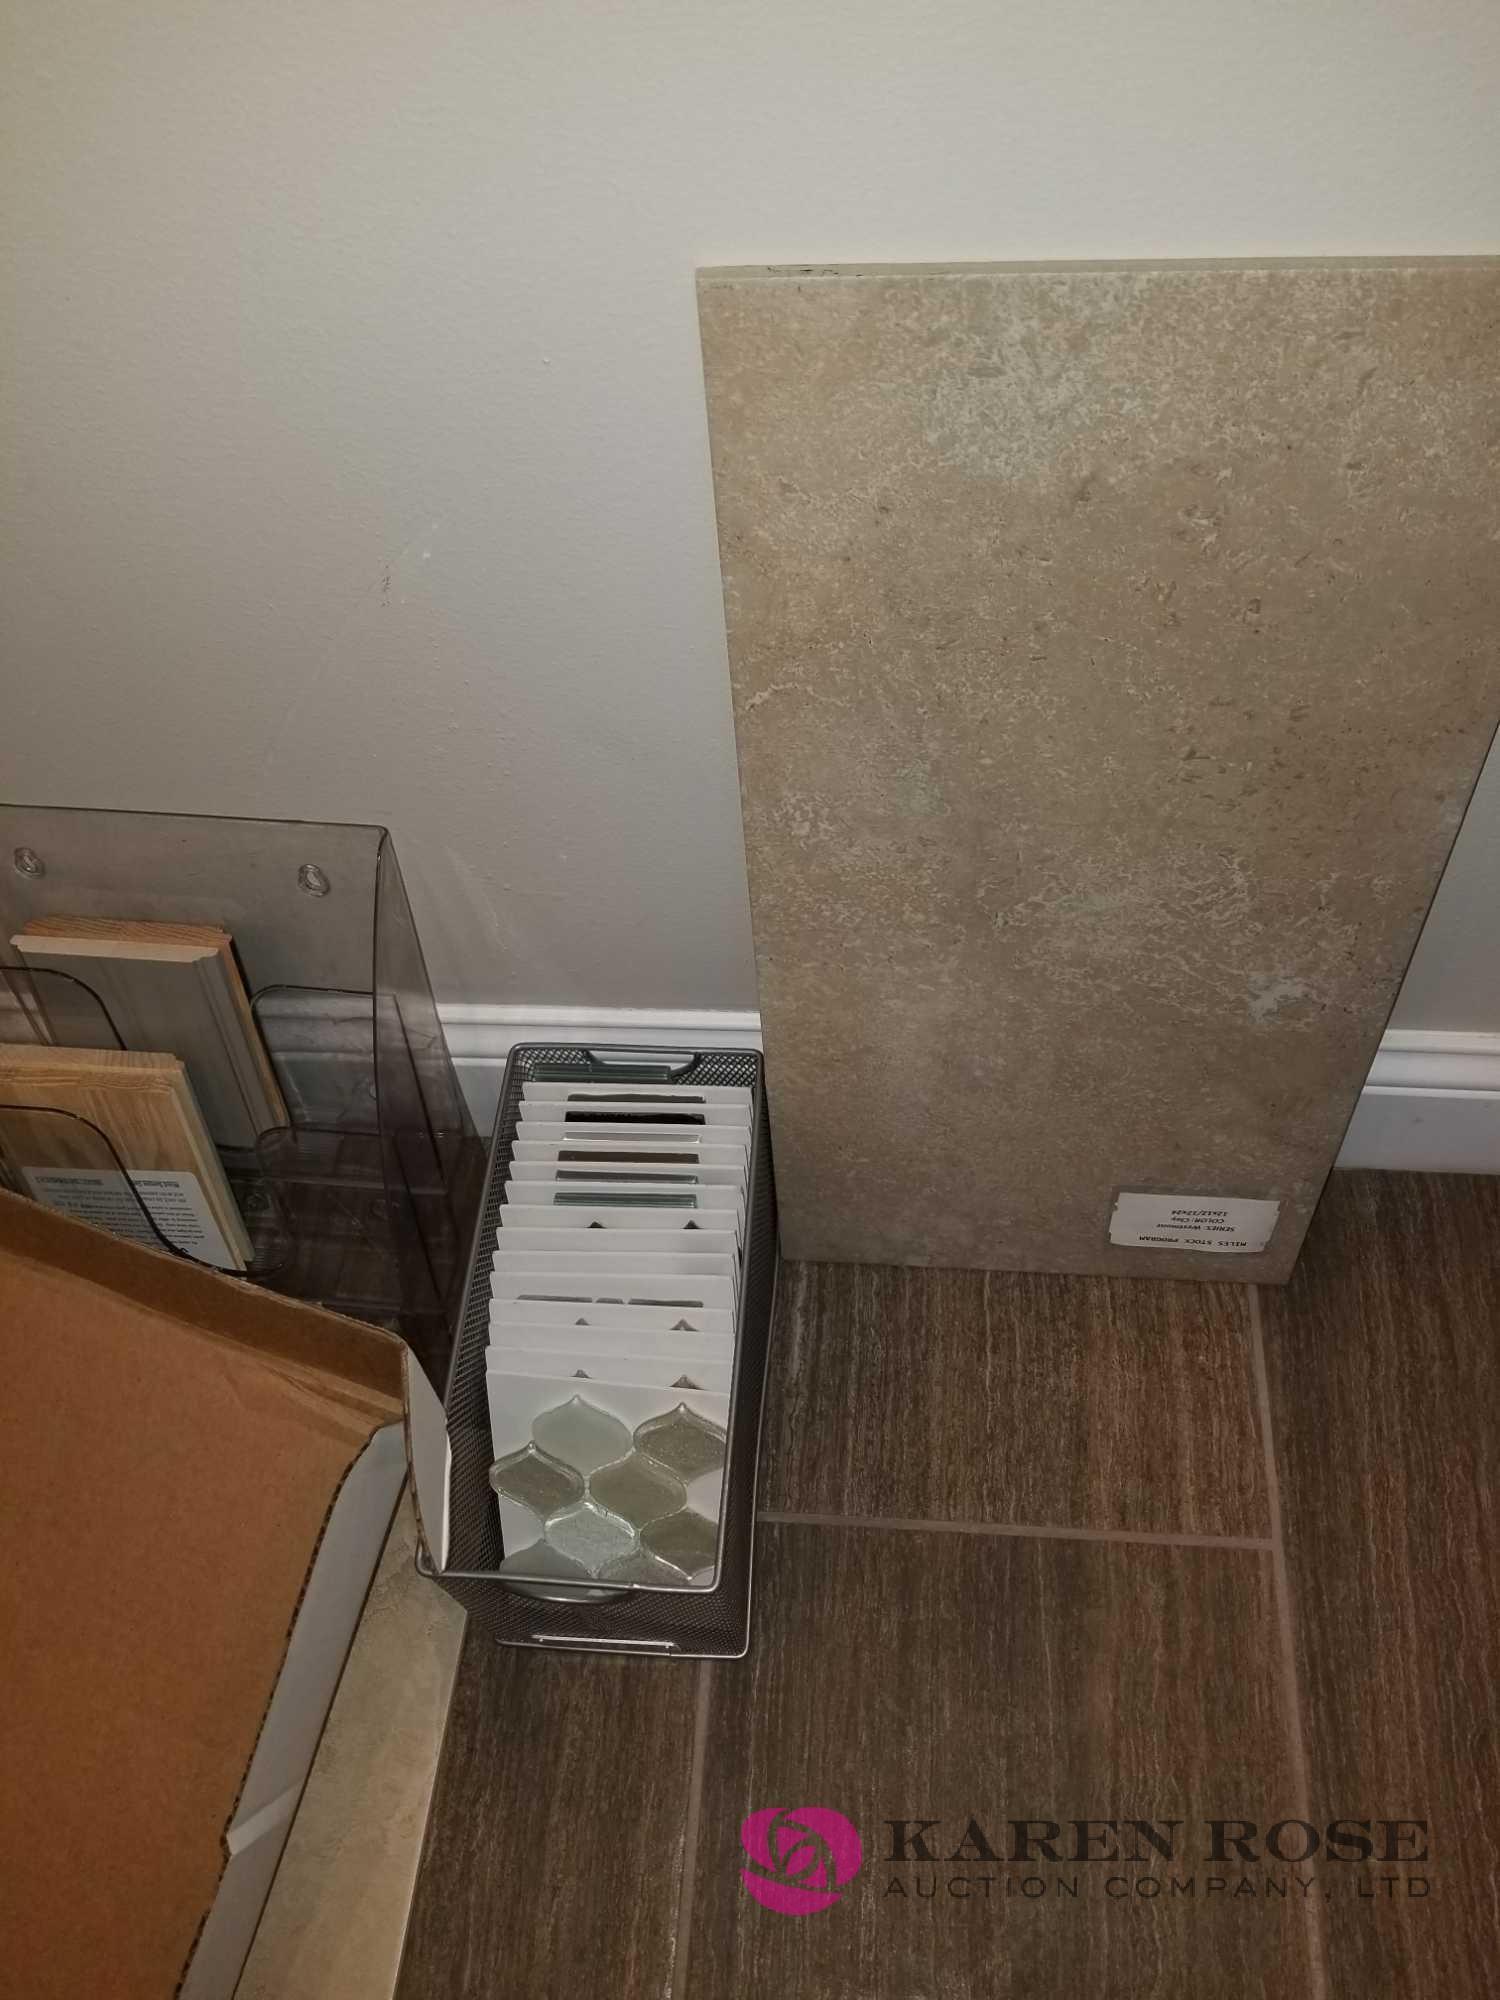 Lot of Sample Stone, Tile and Glass